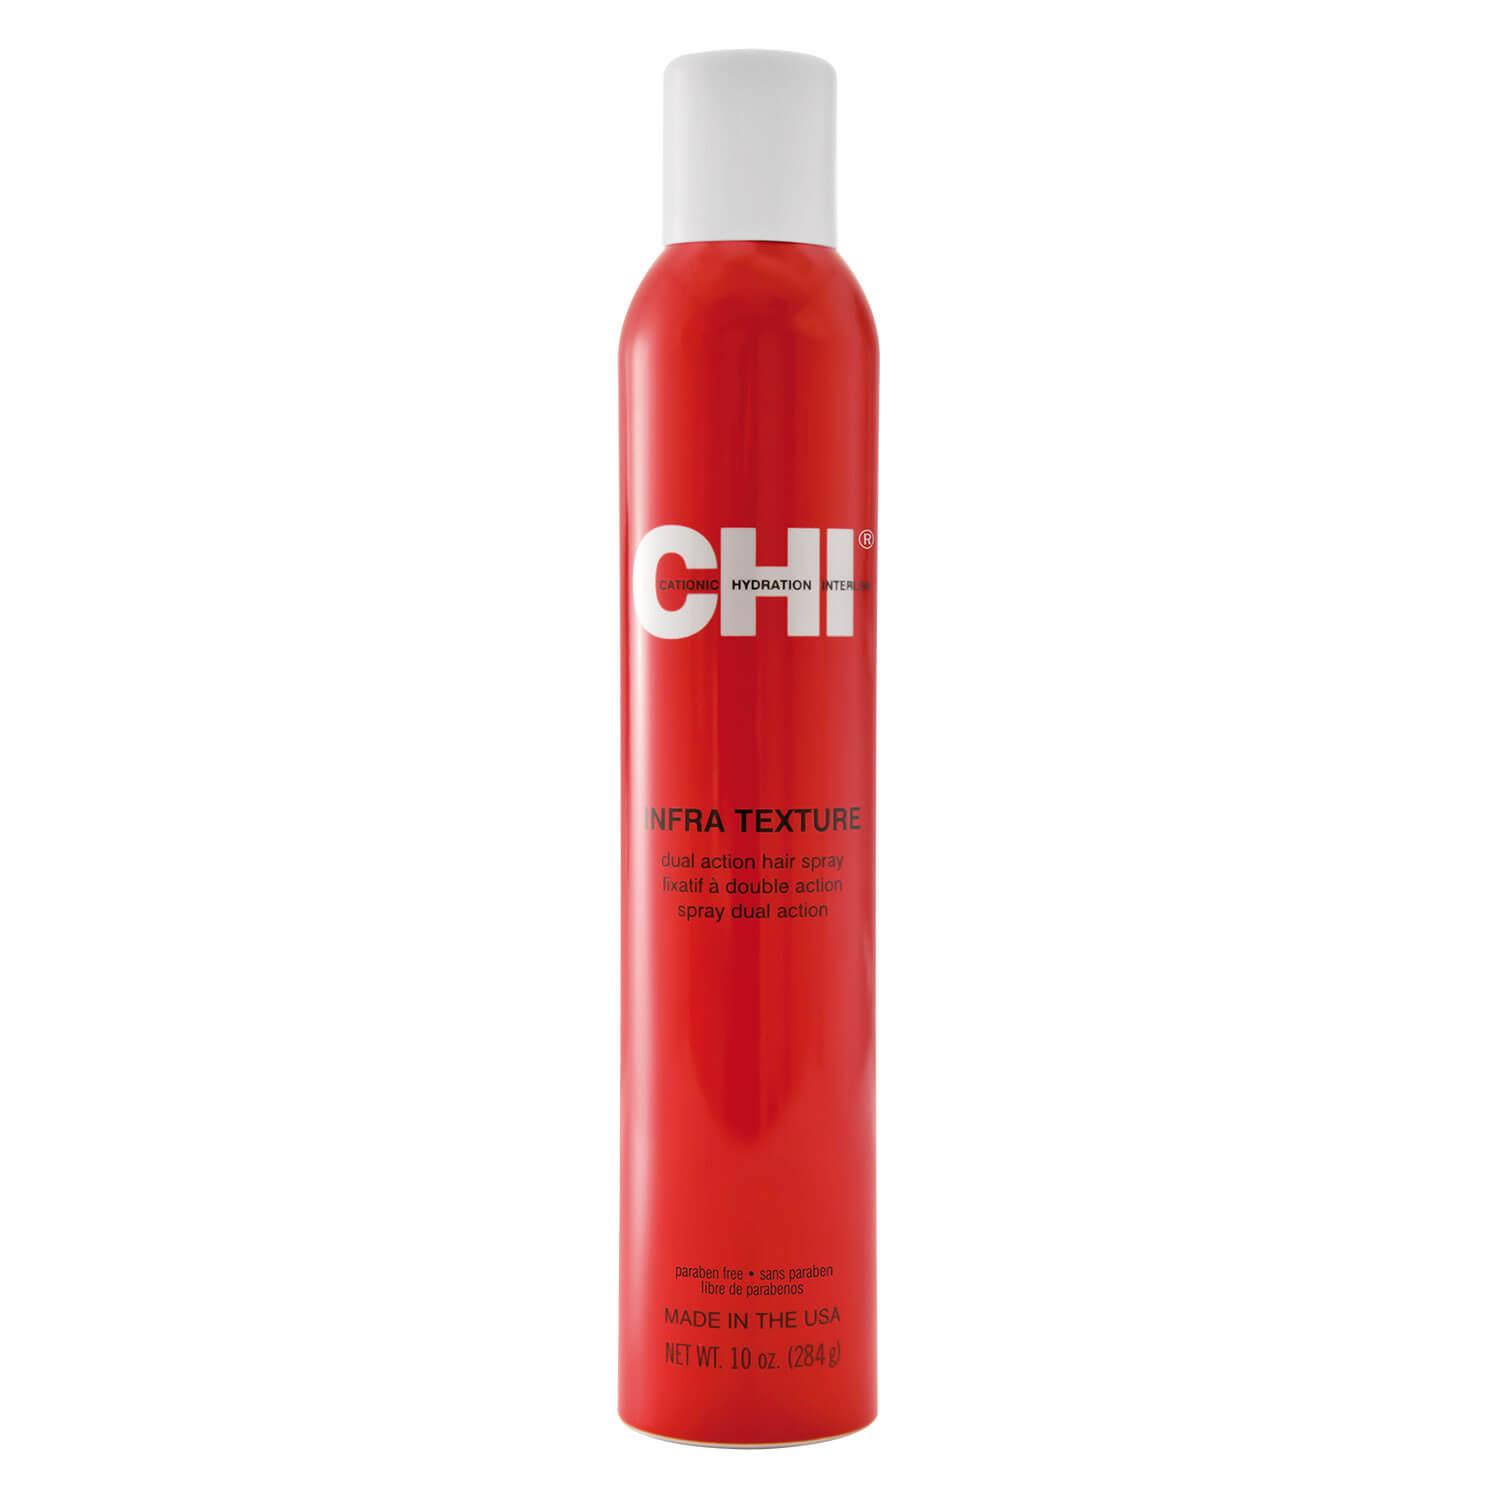 CHI Styling - Infra Texture Dual Action Hair Spray